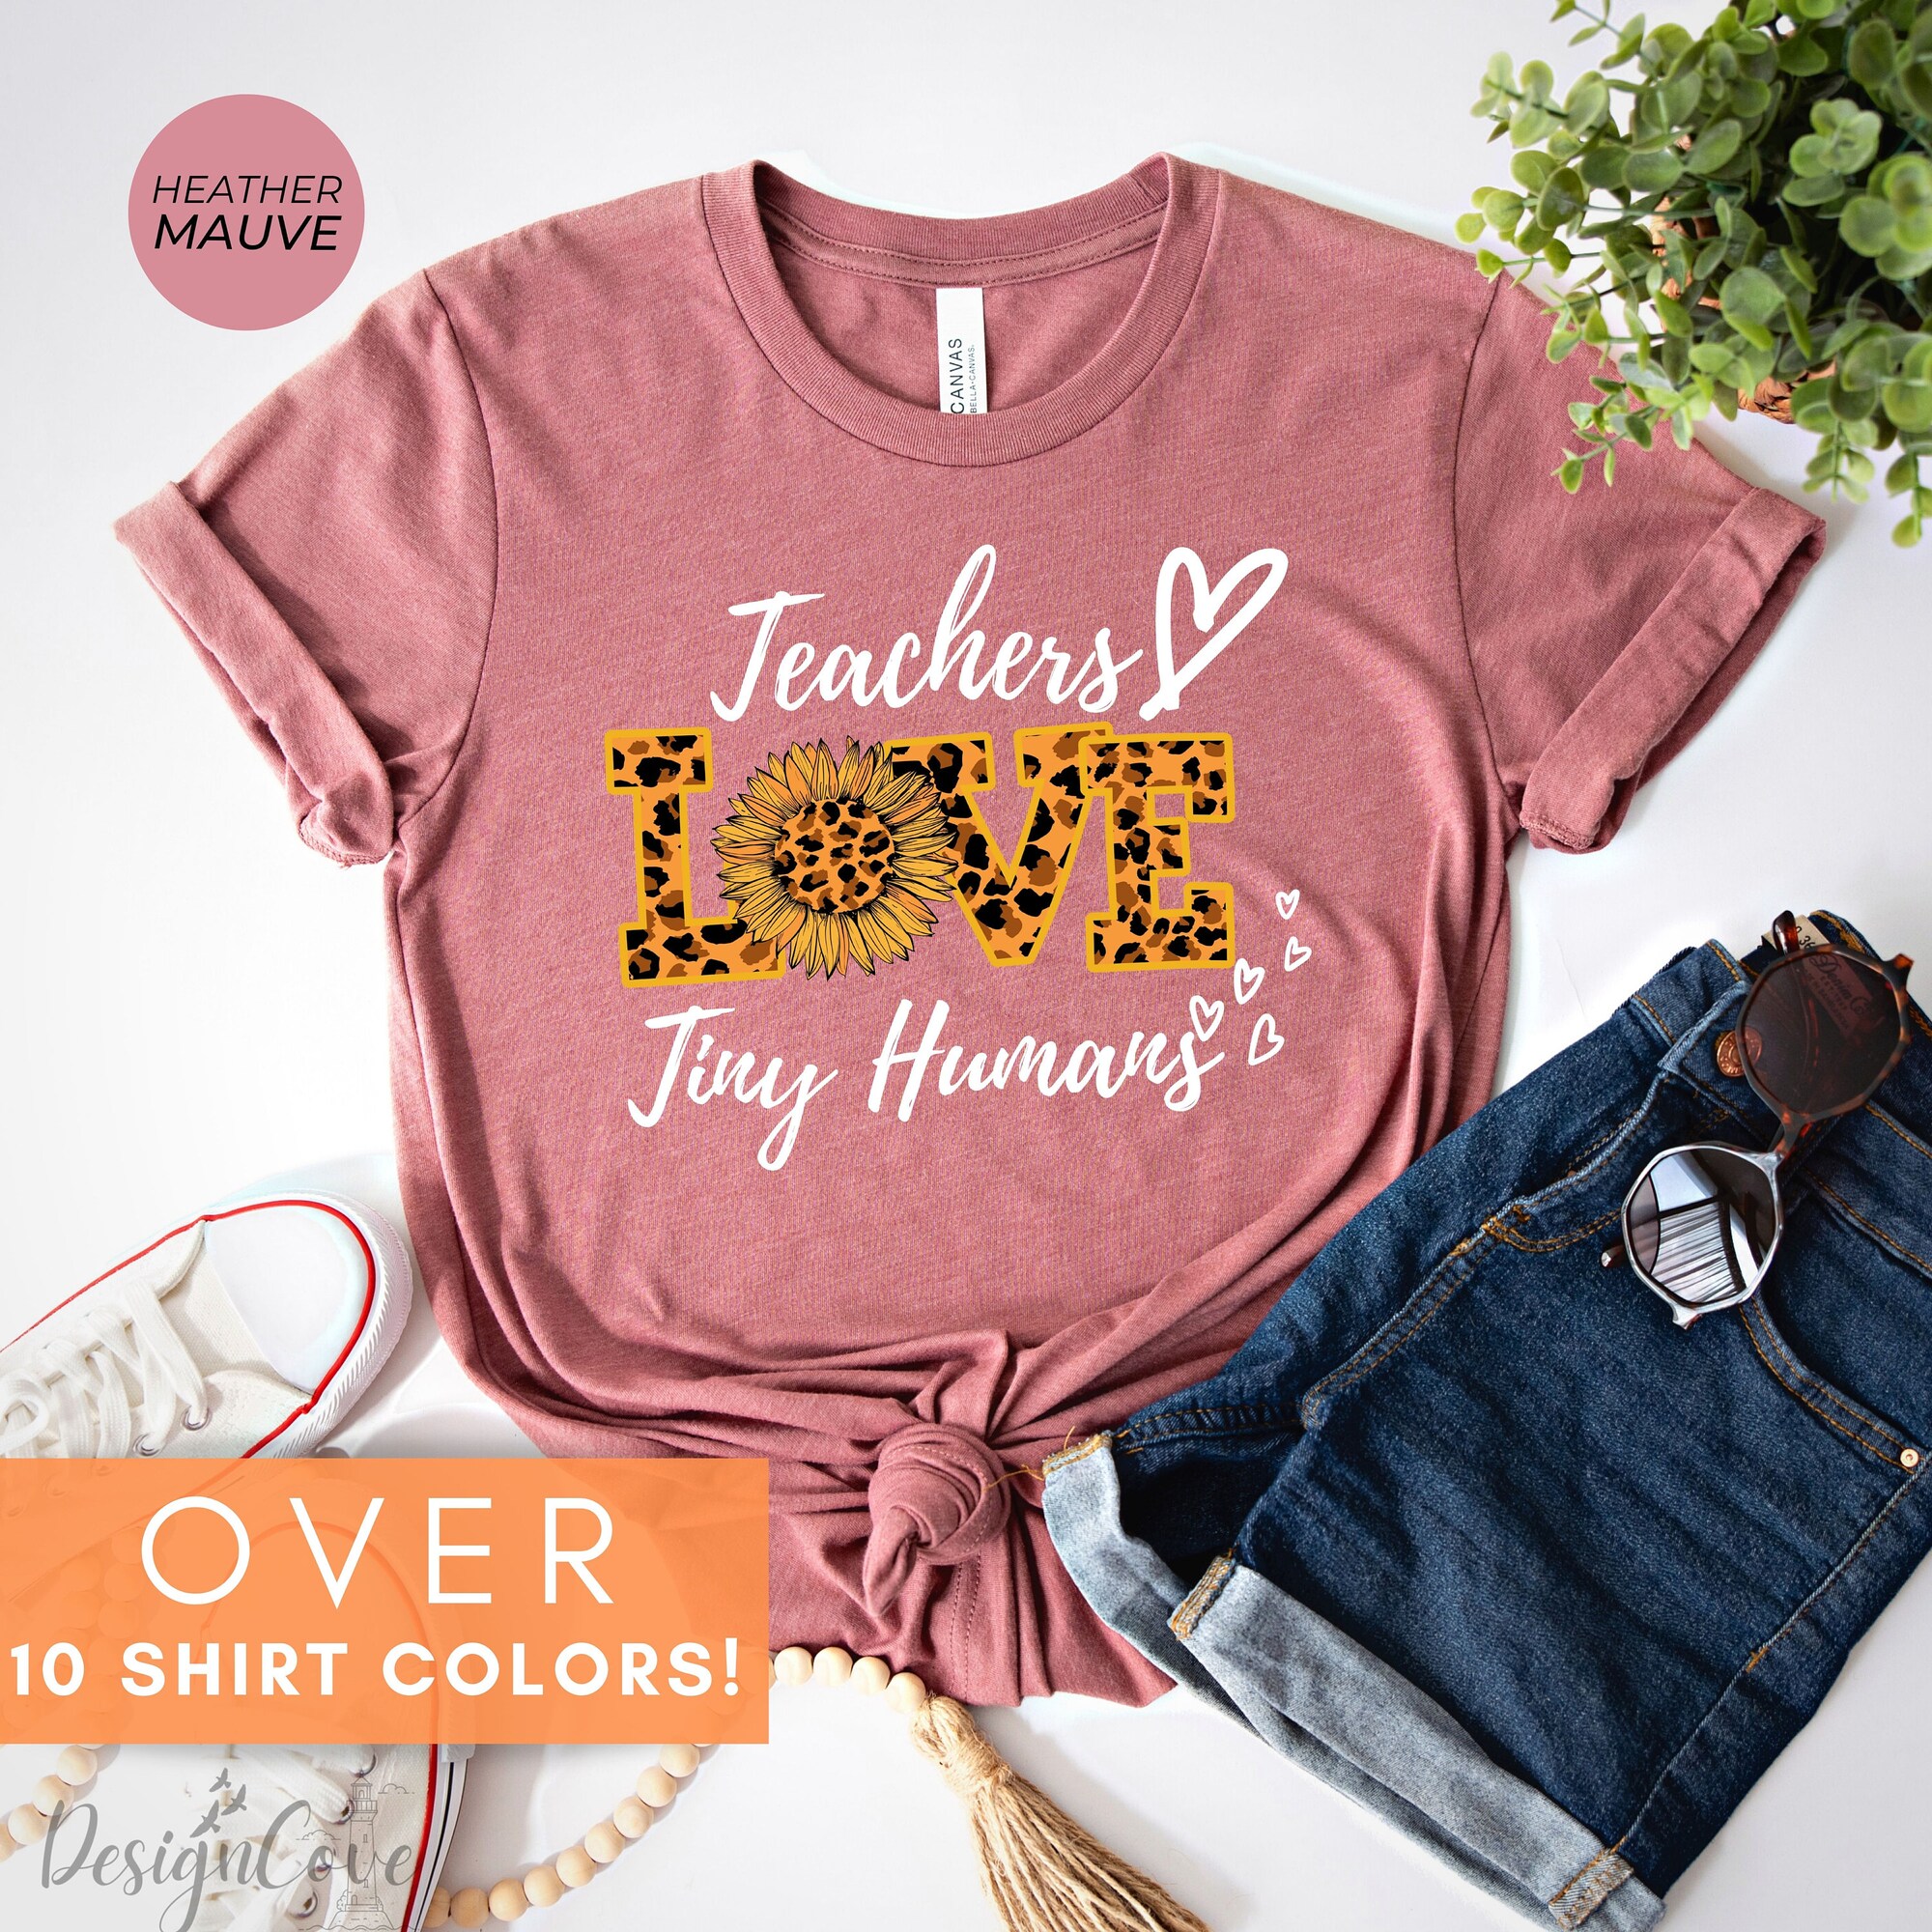 Discover It's A Good Day To Teach Tiny Humans Shirt